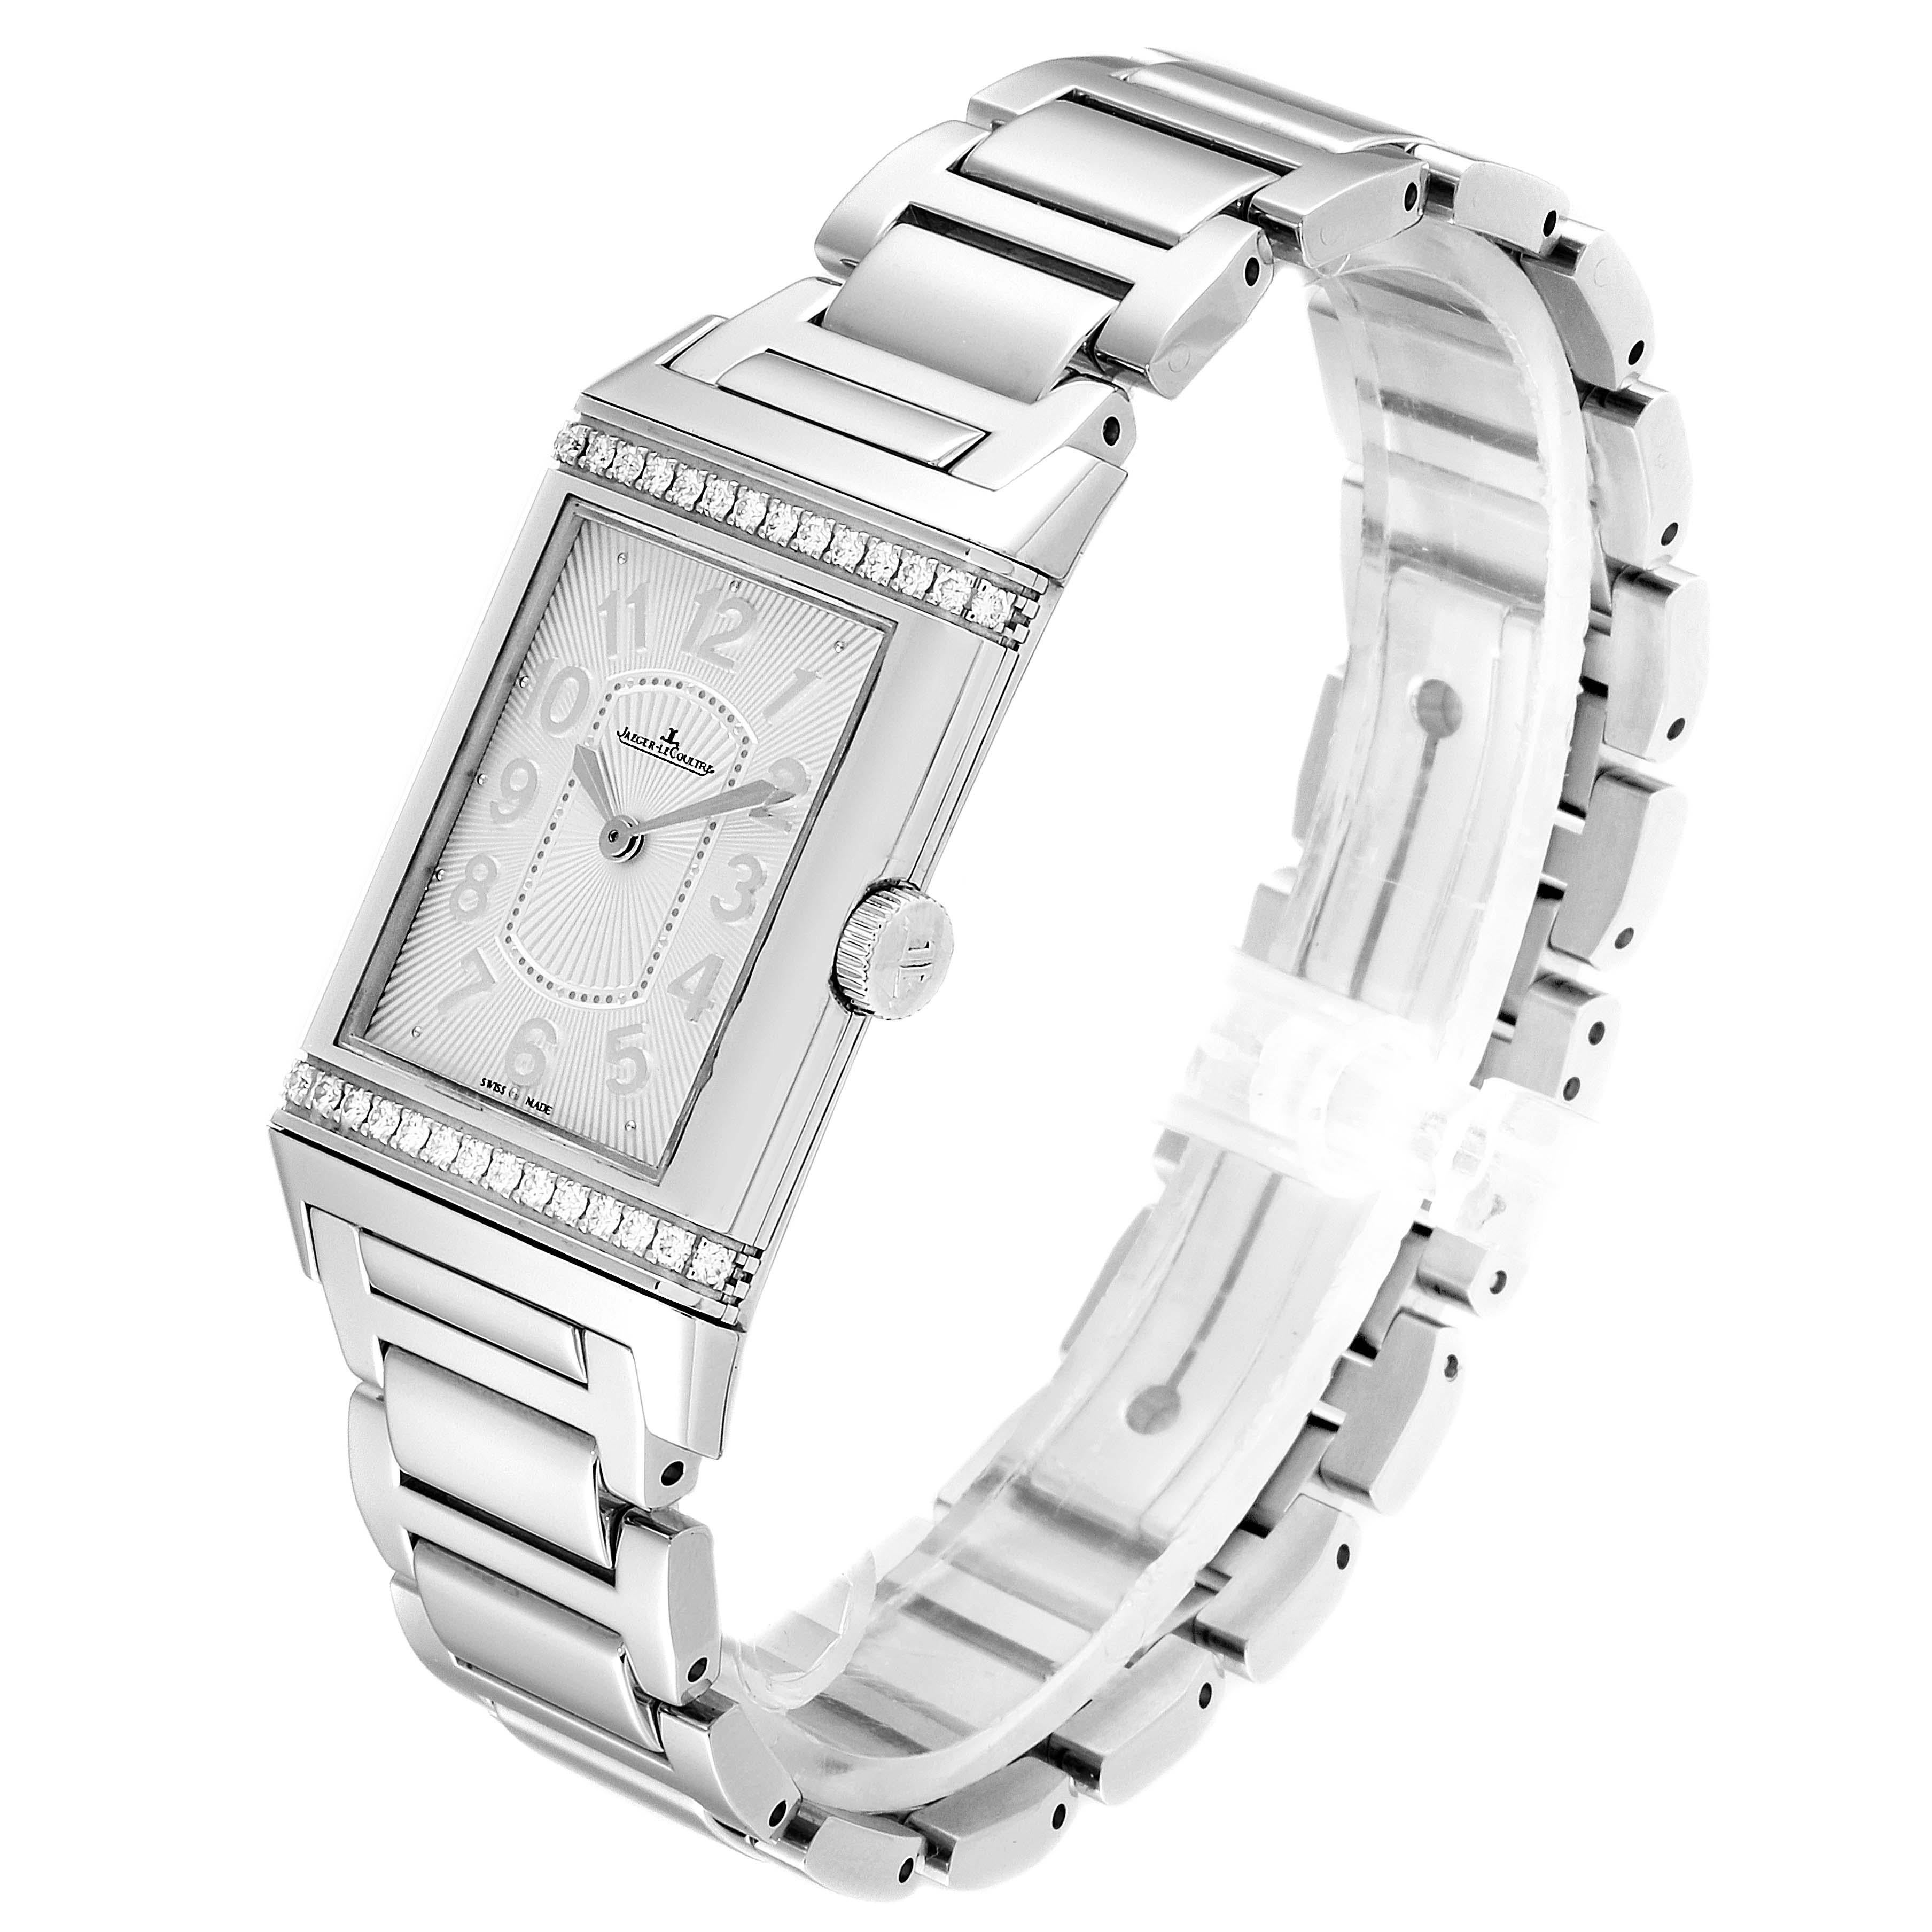 Jaeger LeCoultre Reverso Ultra Thin Diamond Ladies Watch 268.8.86 Q3208121 In Excellent Condition For Sale In Atlanta, GA